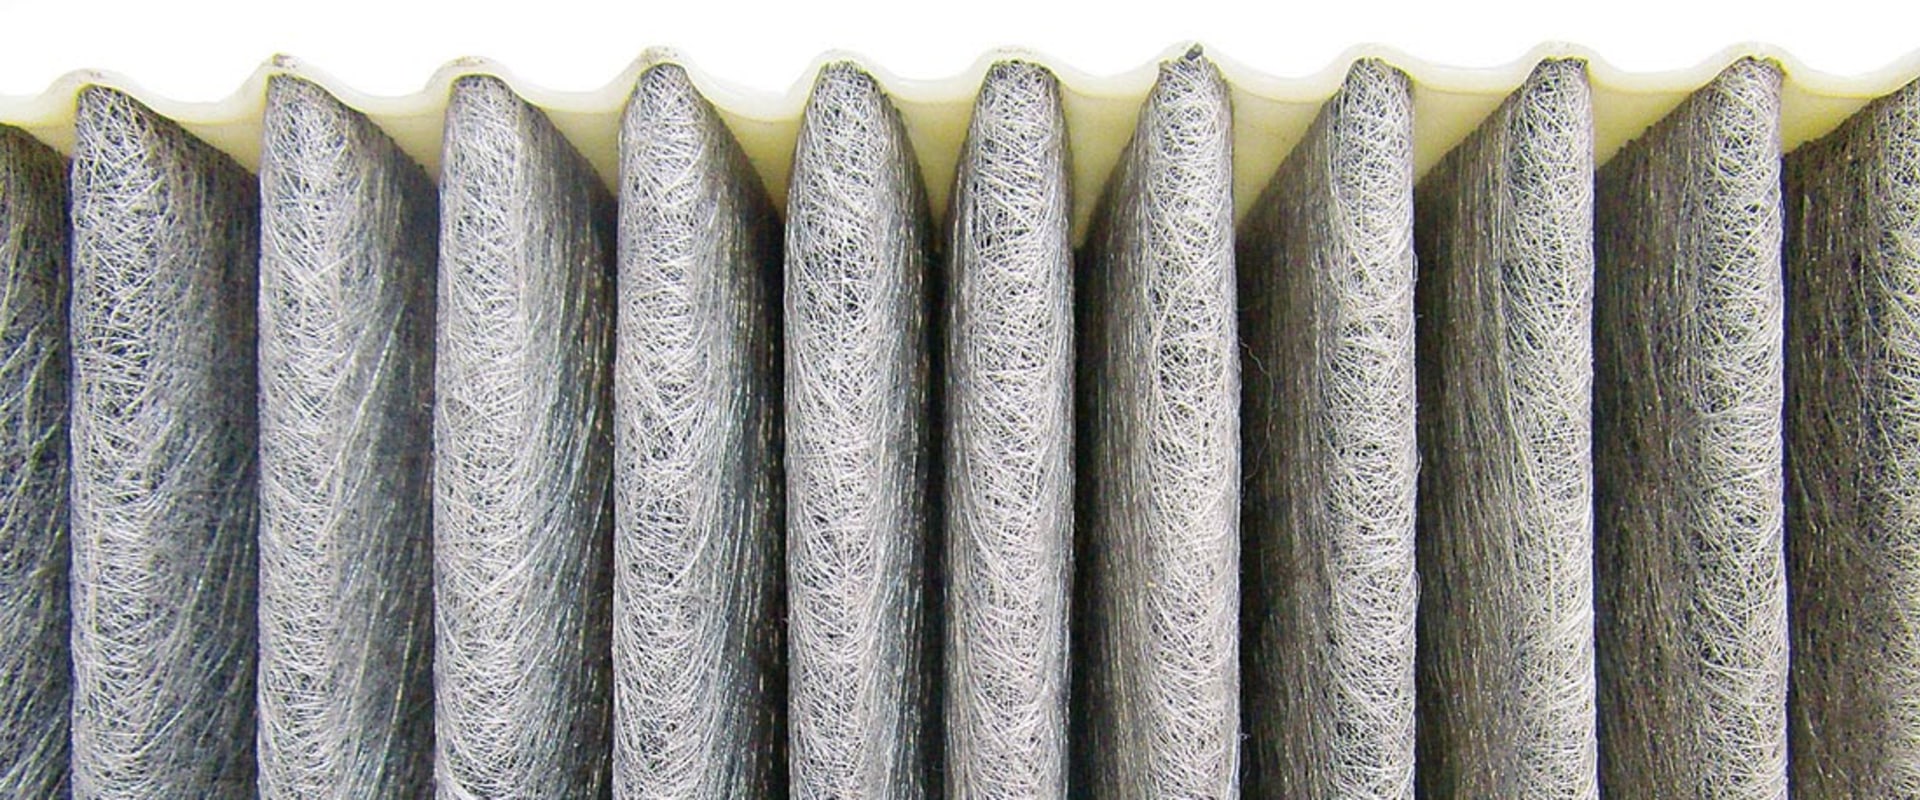 Does the Number of Pleats in an Air Filter Really Matter?